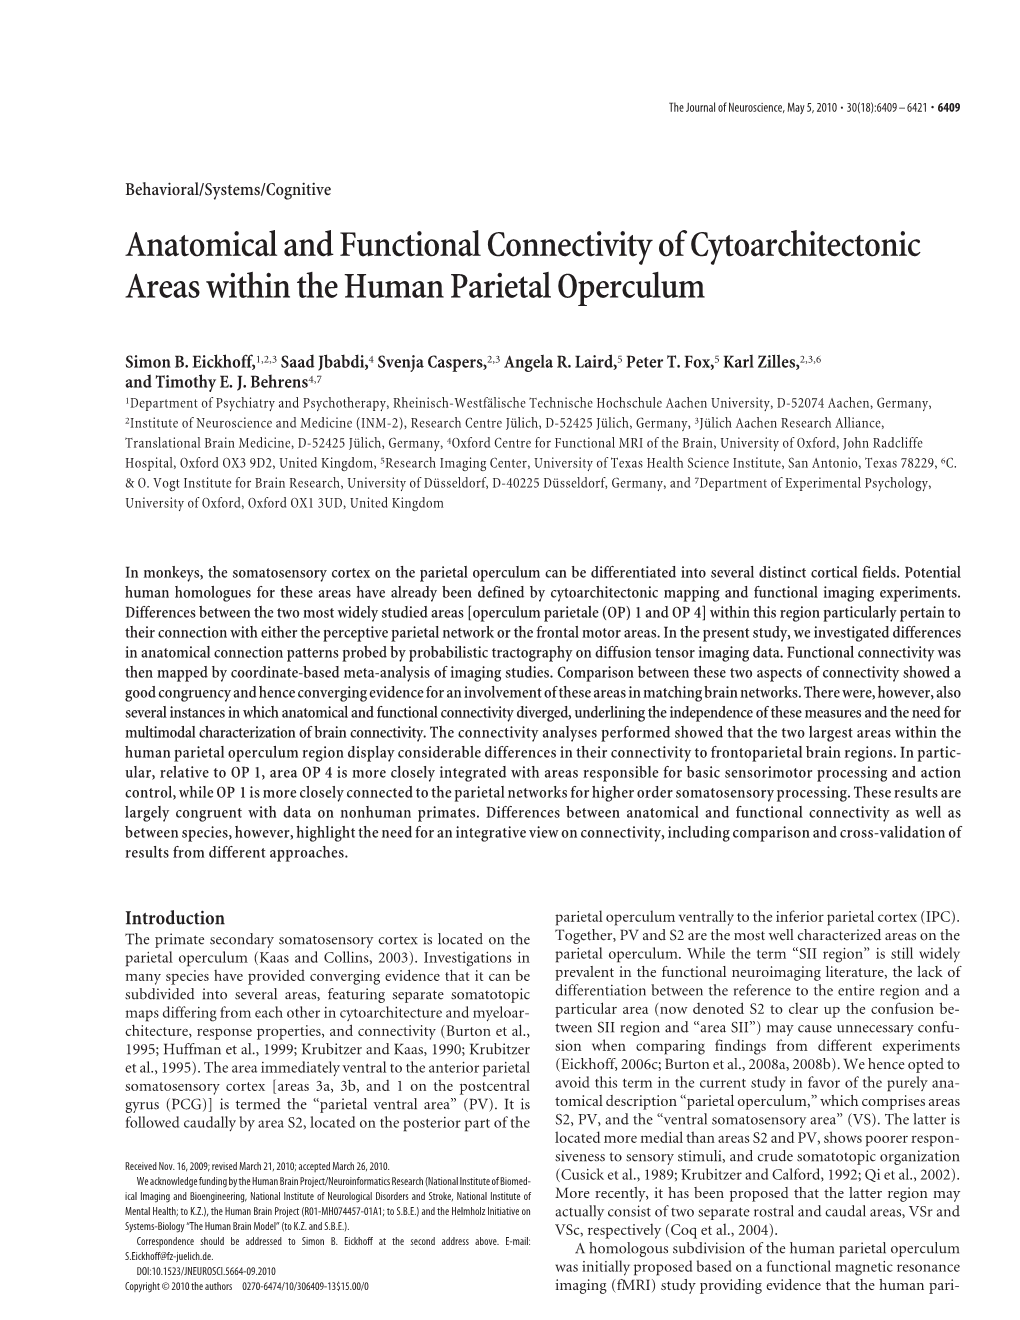 Anatomical and Functional Connectivity of Cytoarchitectonic Areas Within the Human Parietal Operculum